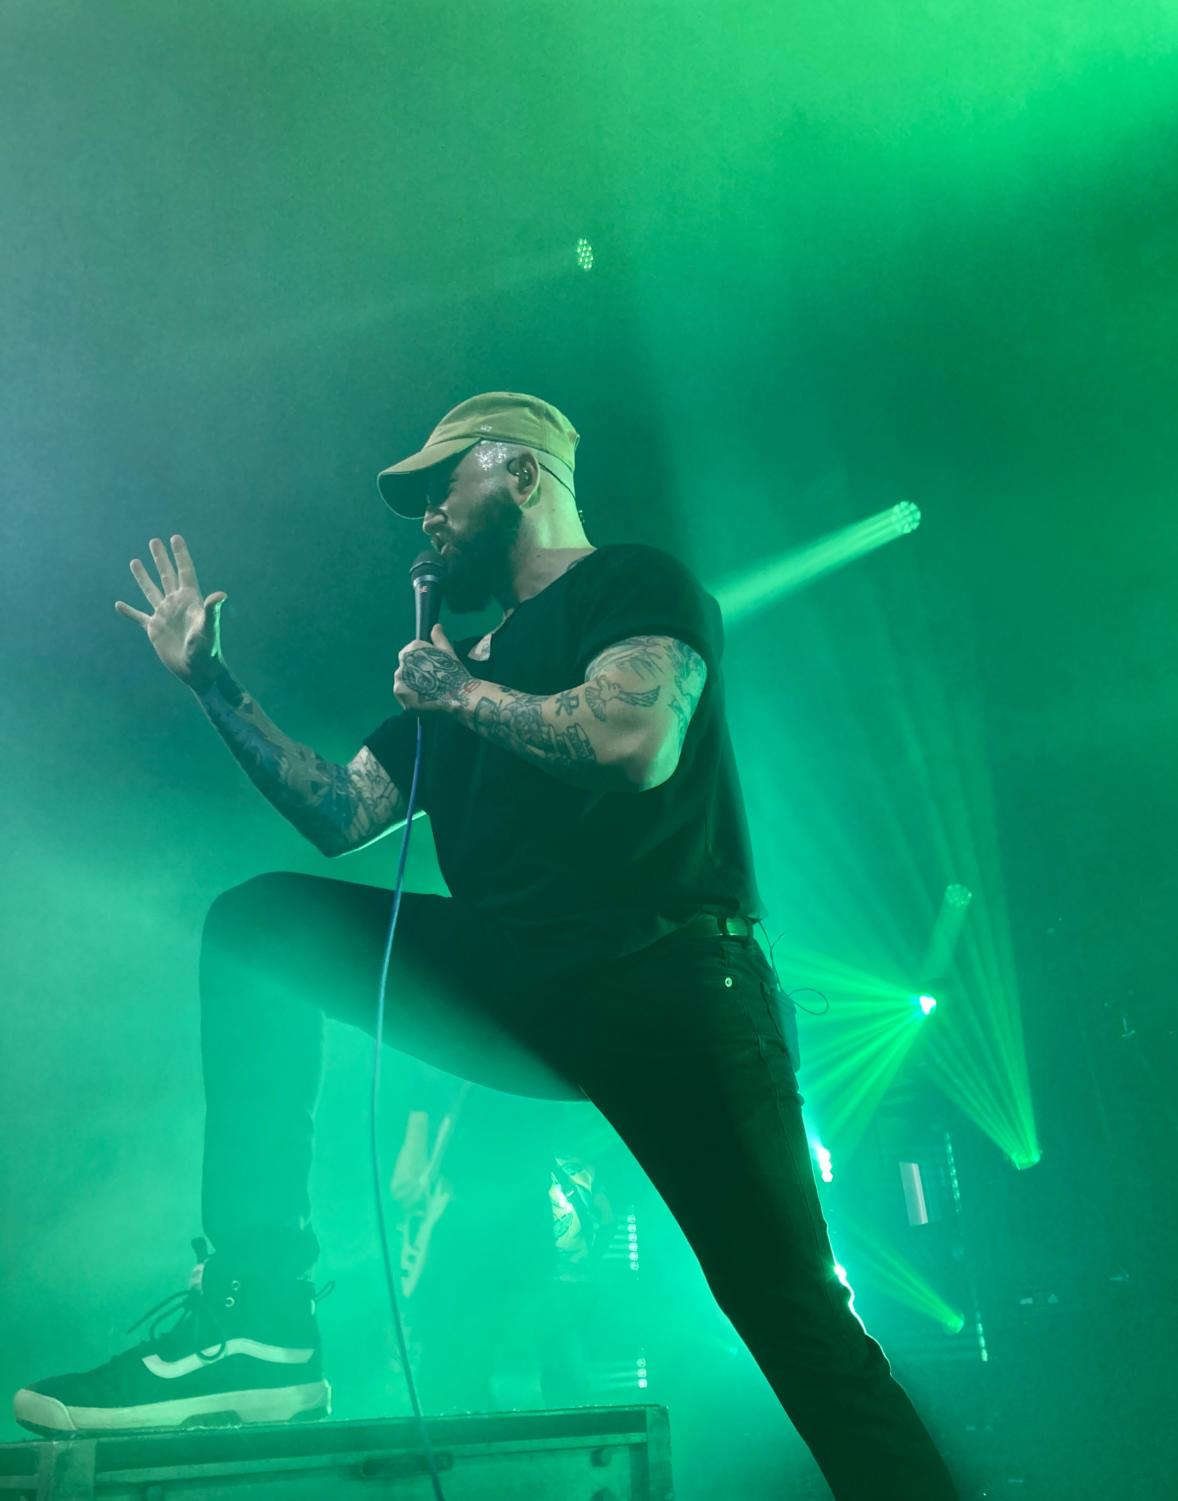 August Burns Red lead vocalist Jake Luhrs commands the stage